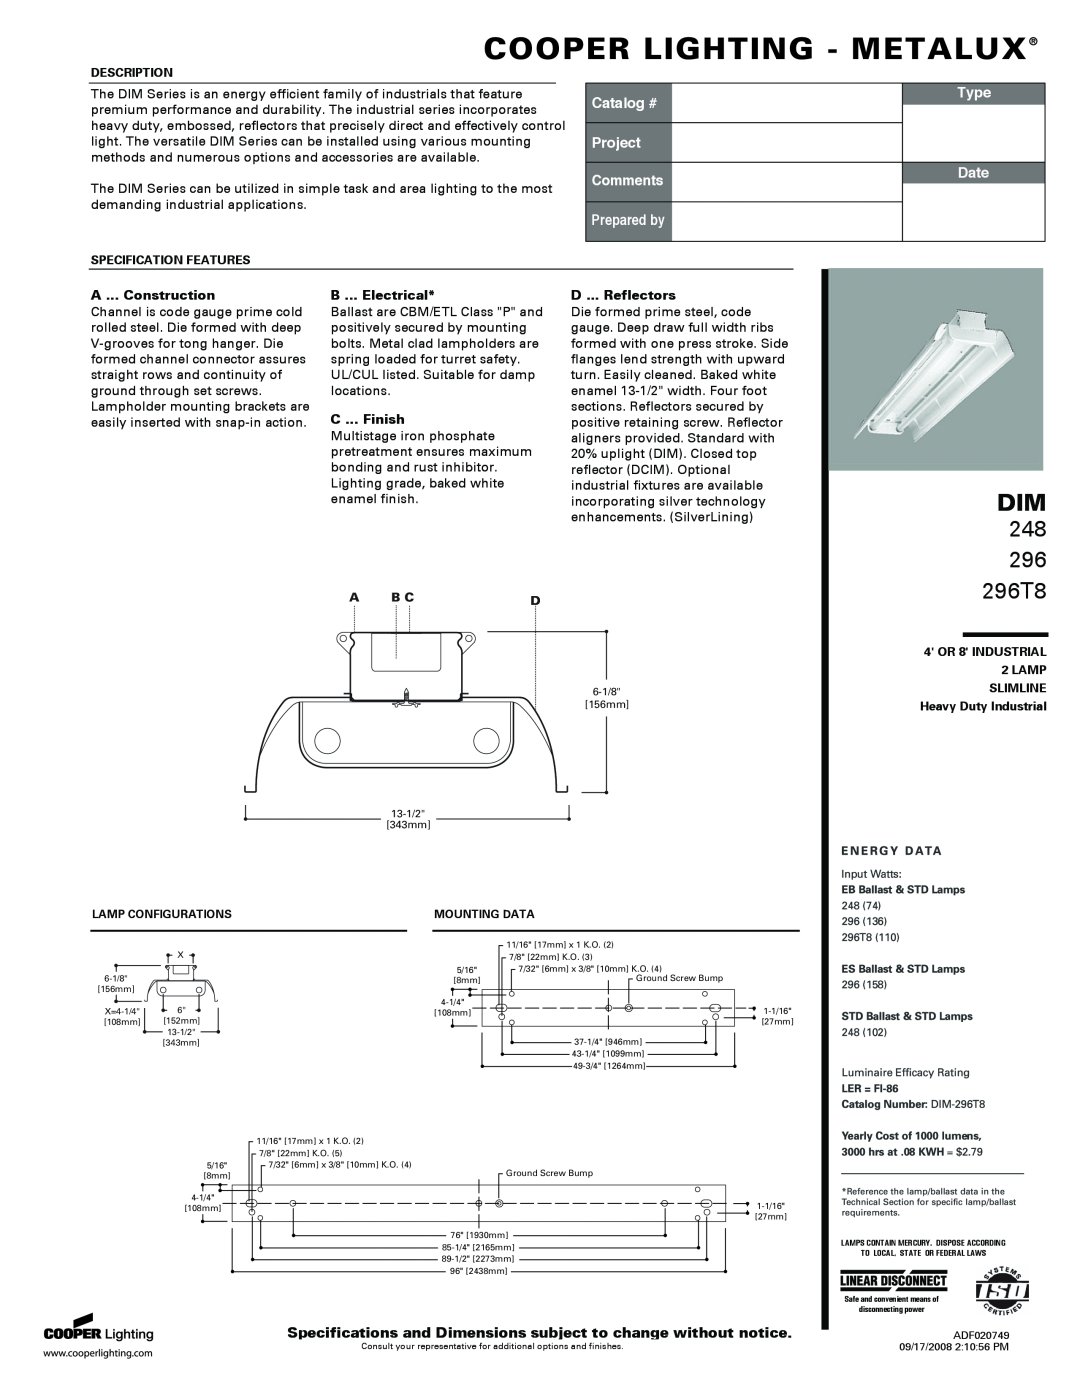 Cooper Lighting DIM specifications Cooper Lighting - Metalux, 248, 296T8, Catalog #, Project Comments, Prepared by, Type 